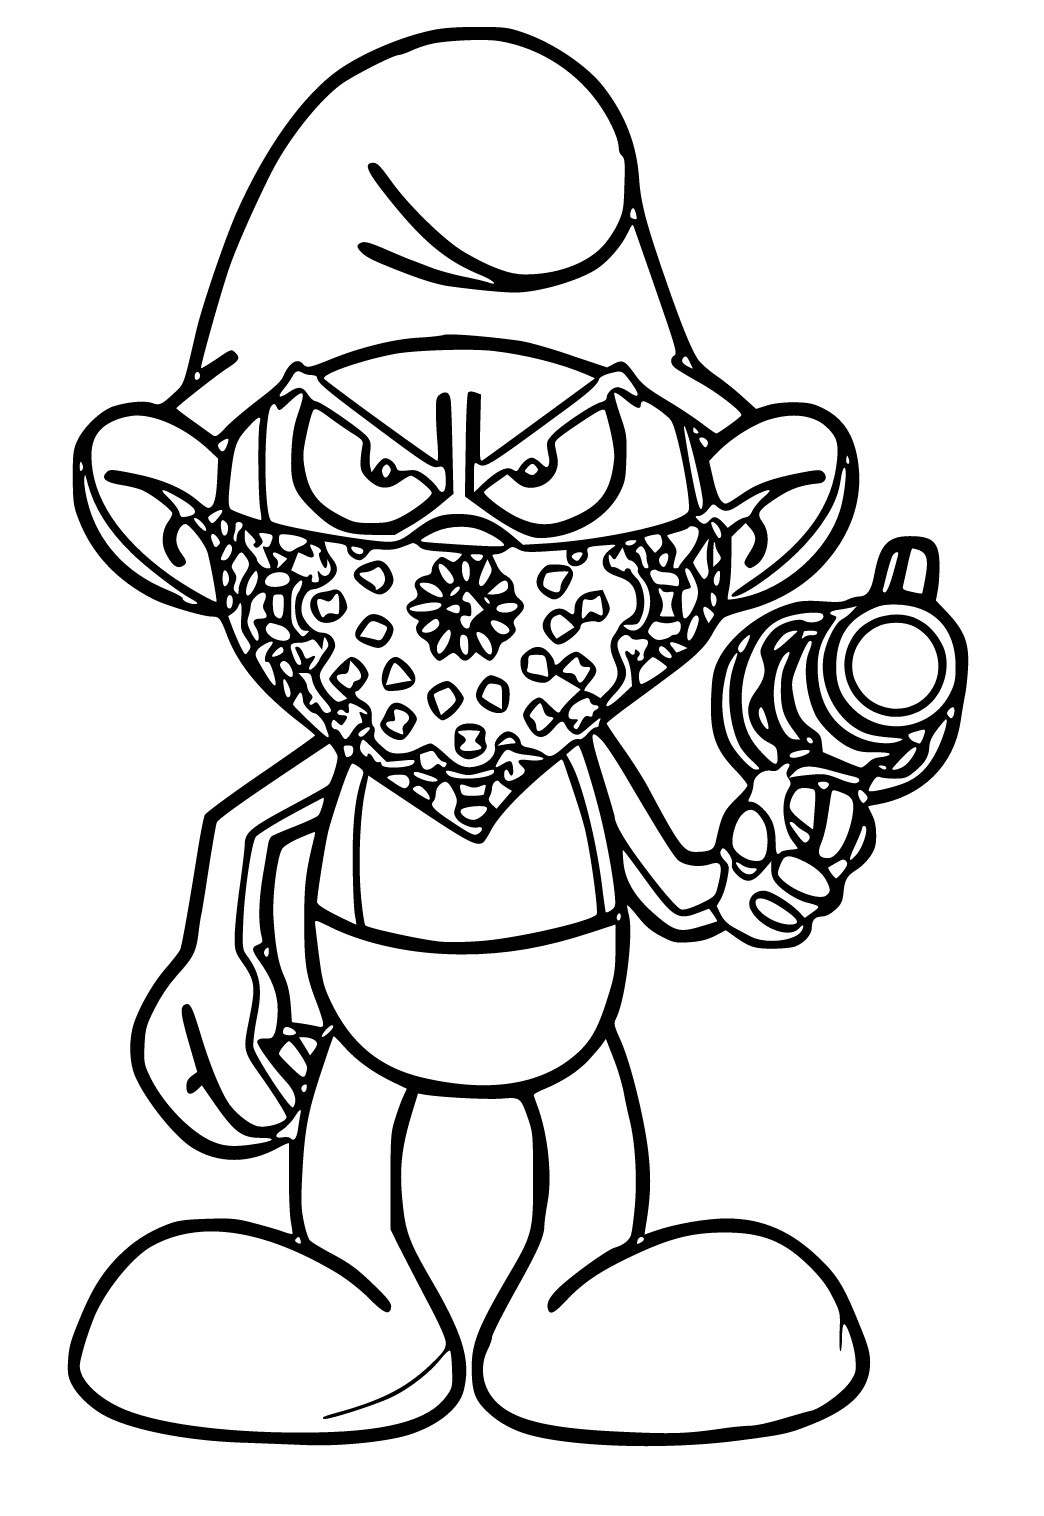 gangster elmo coloring pages